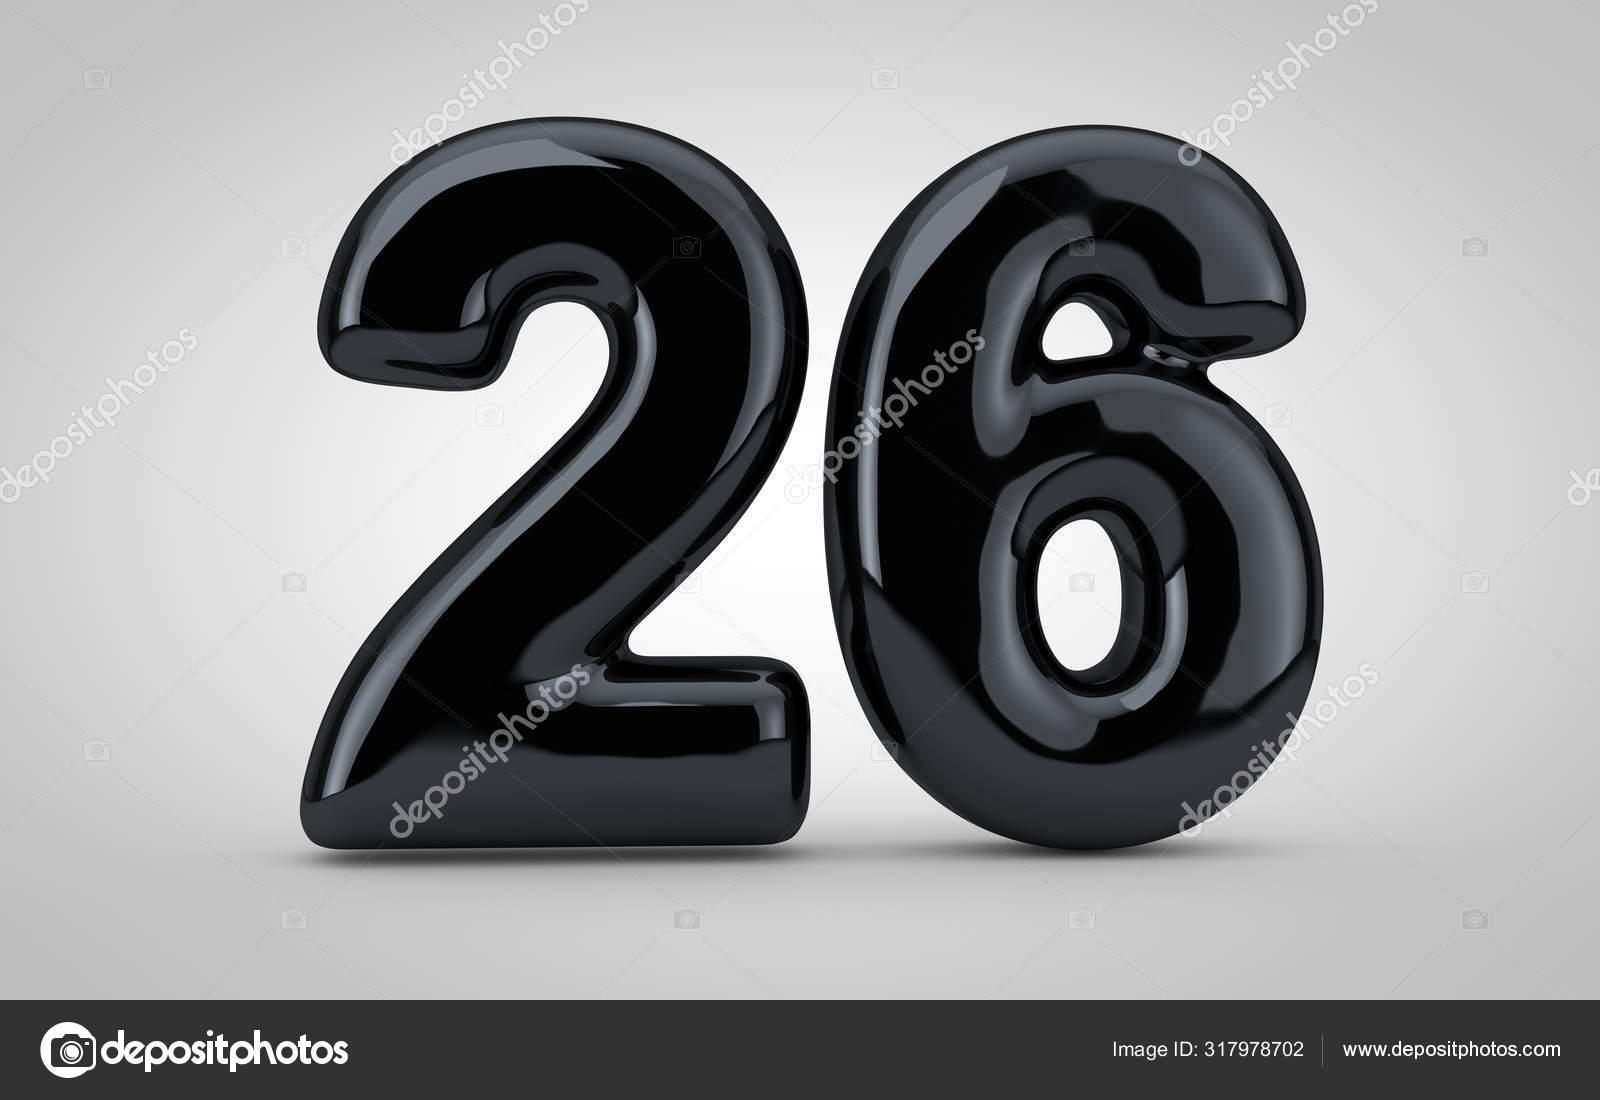 Black glossy balloon number 26 isolated on white background. Stock